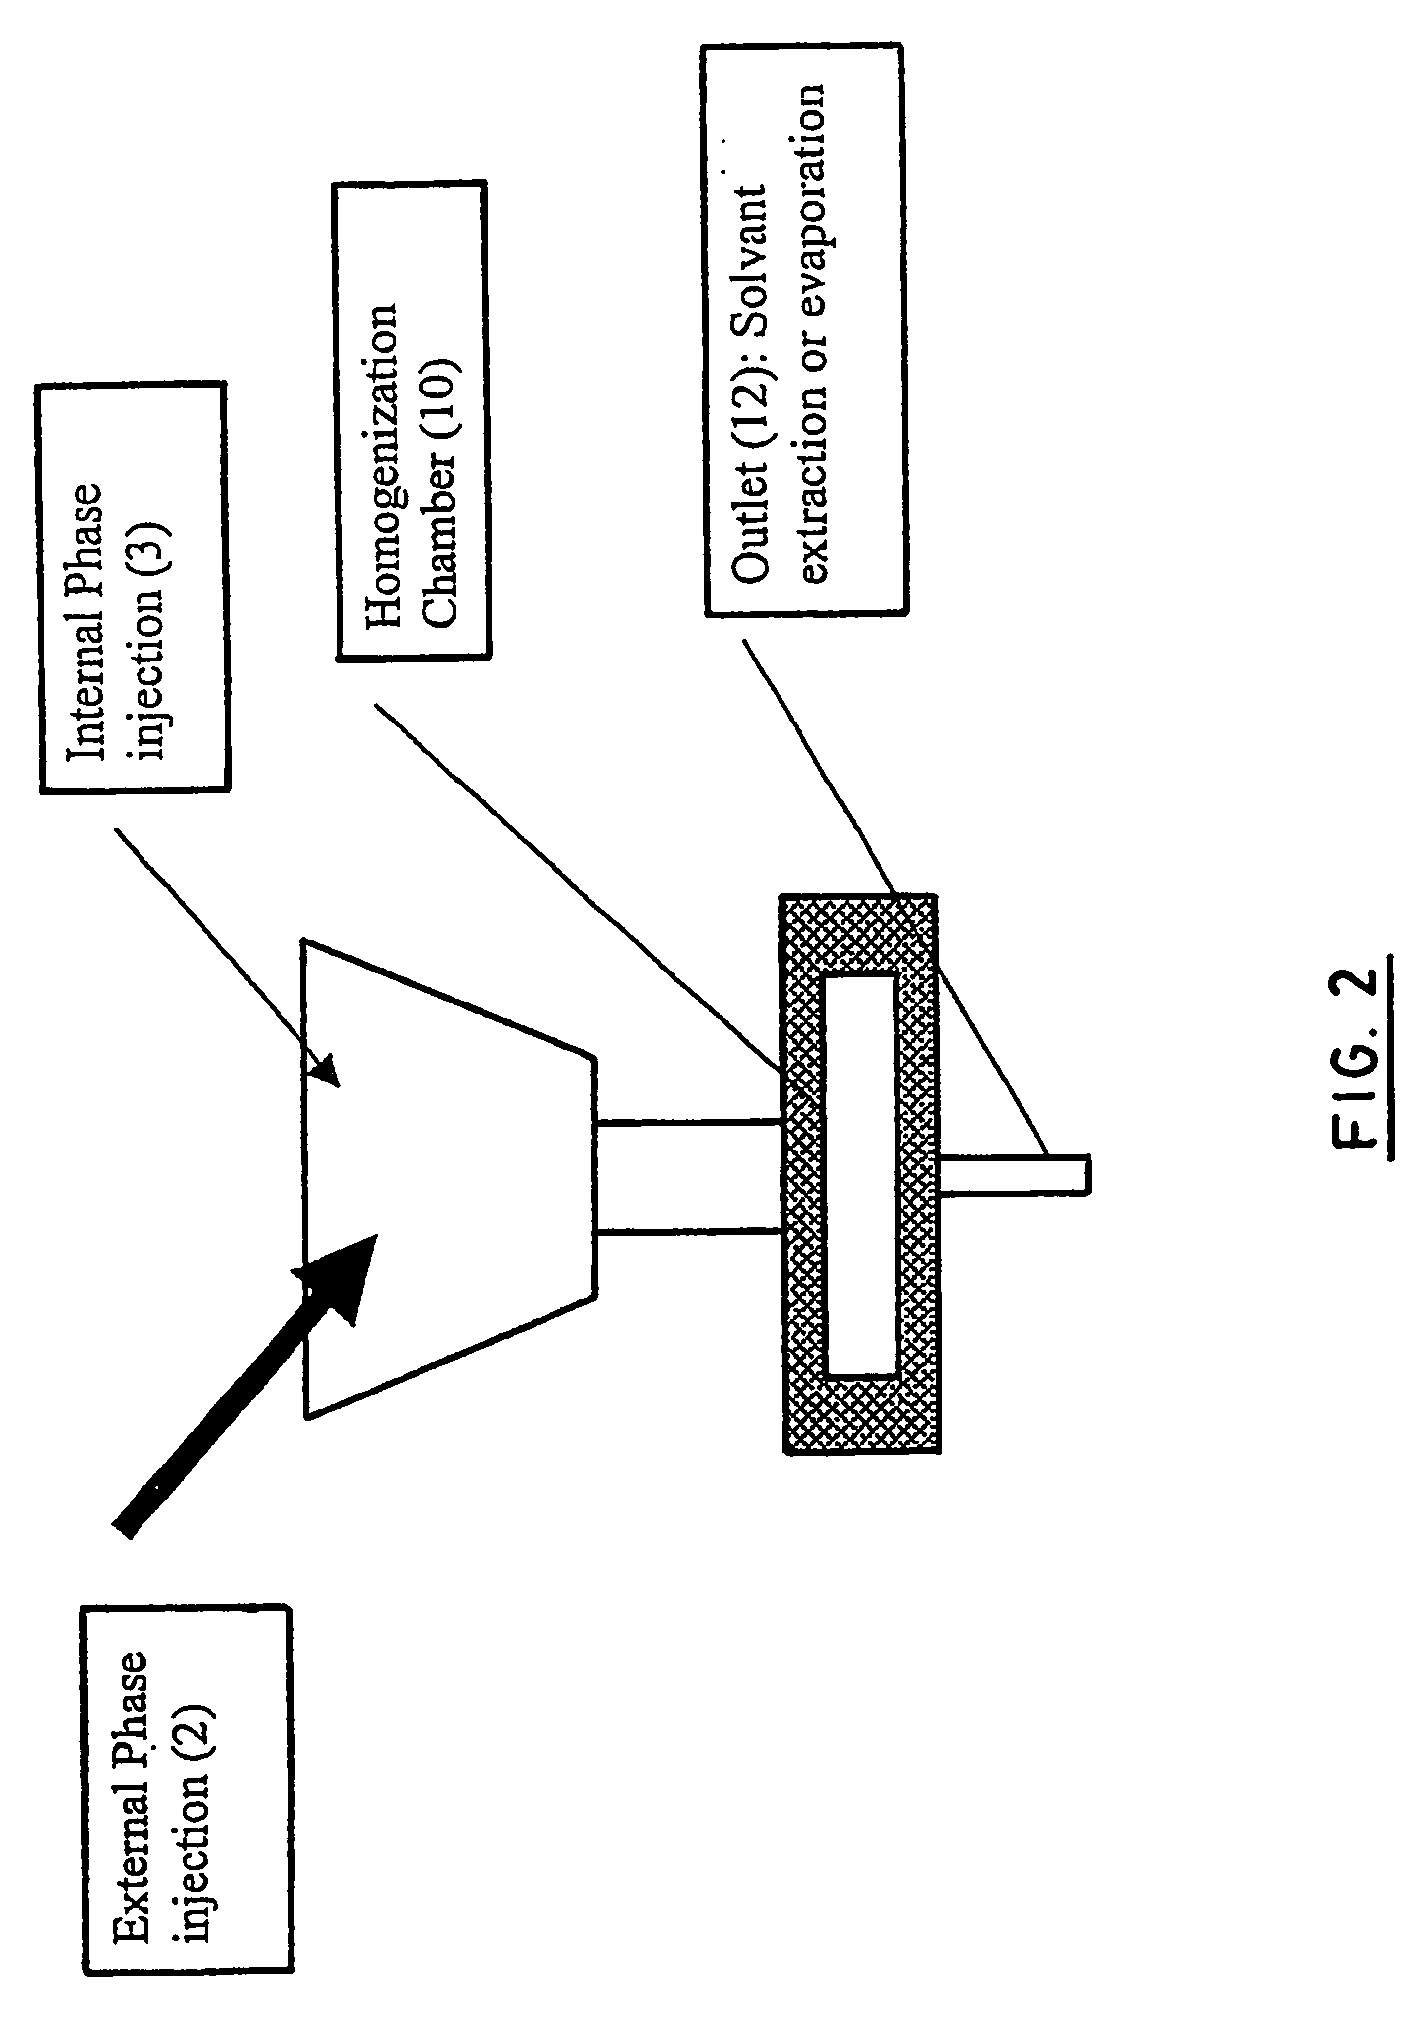 Stealthy polymeric biodegradable nanospheres and uses thereof